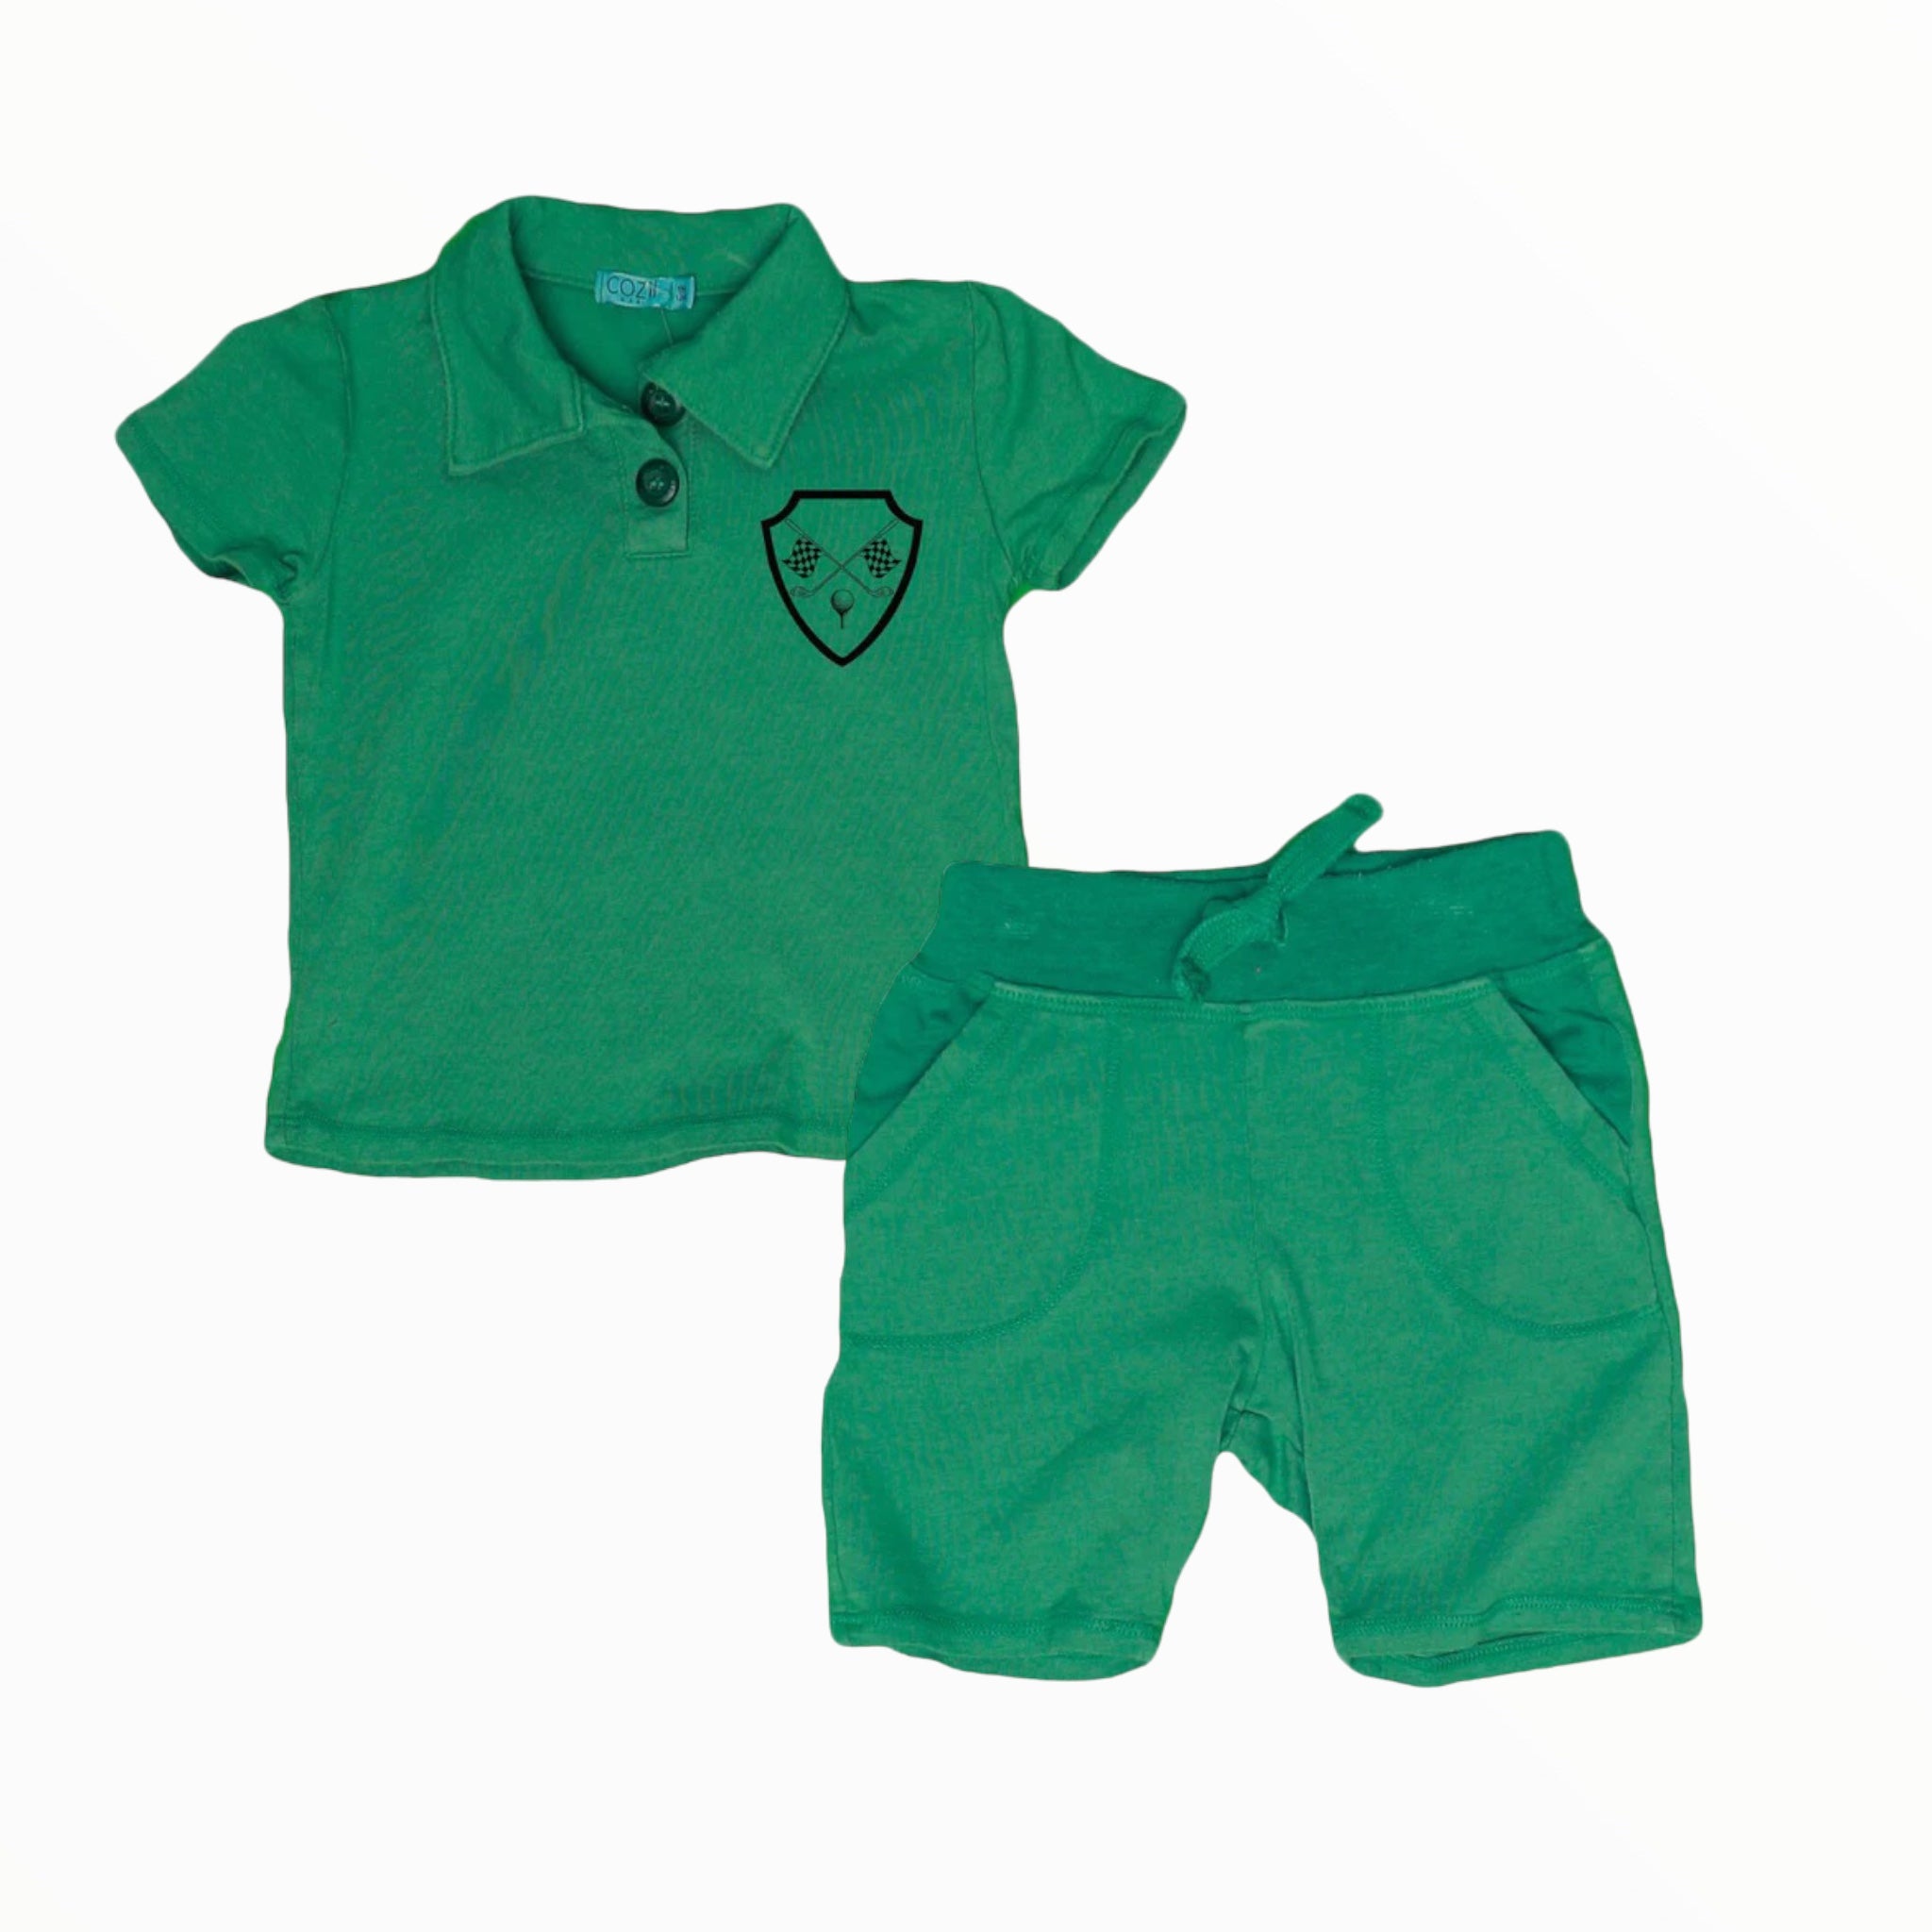 COZII S/S POLO AND SHORTS SET - CLOVER